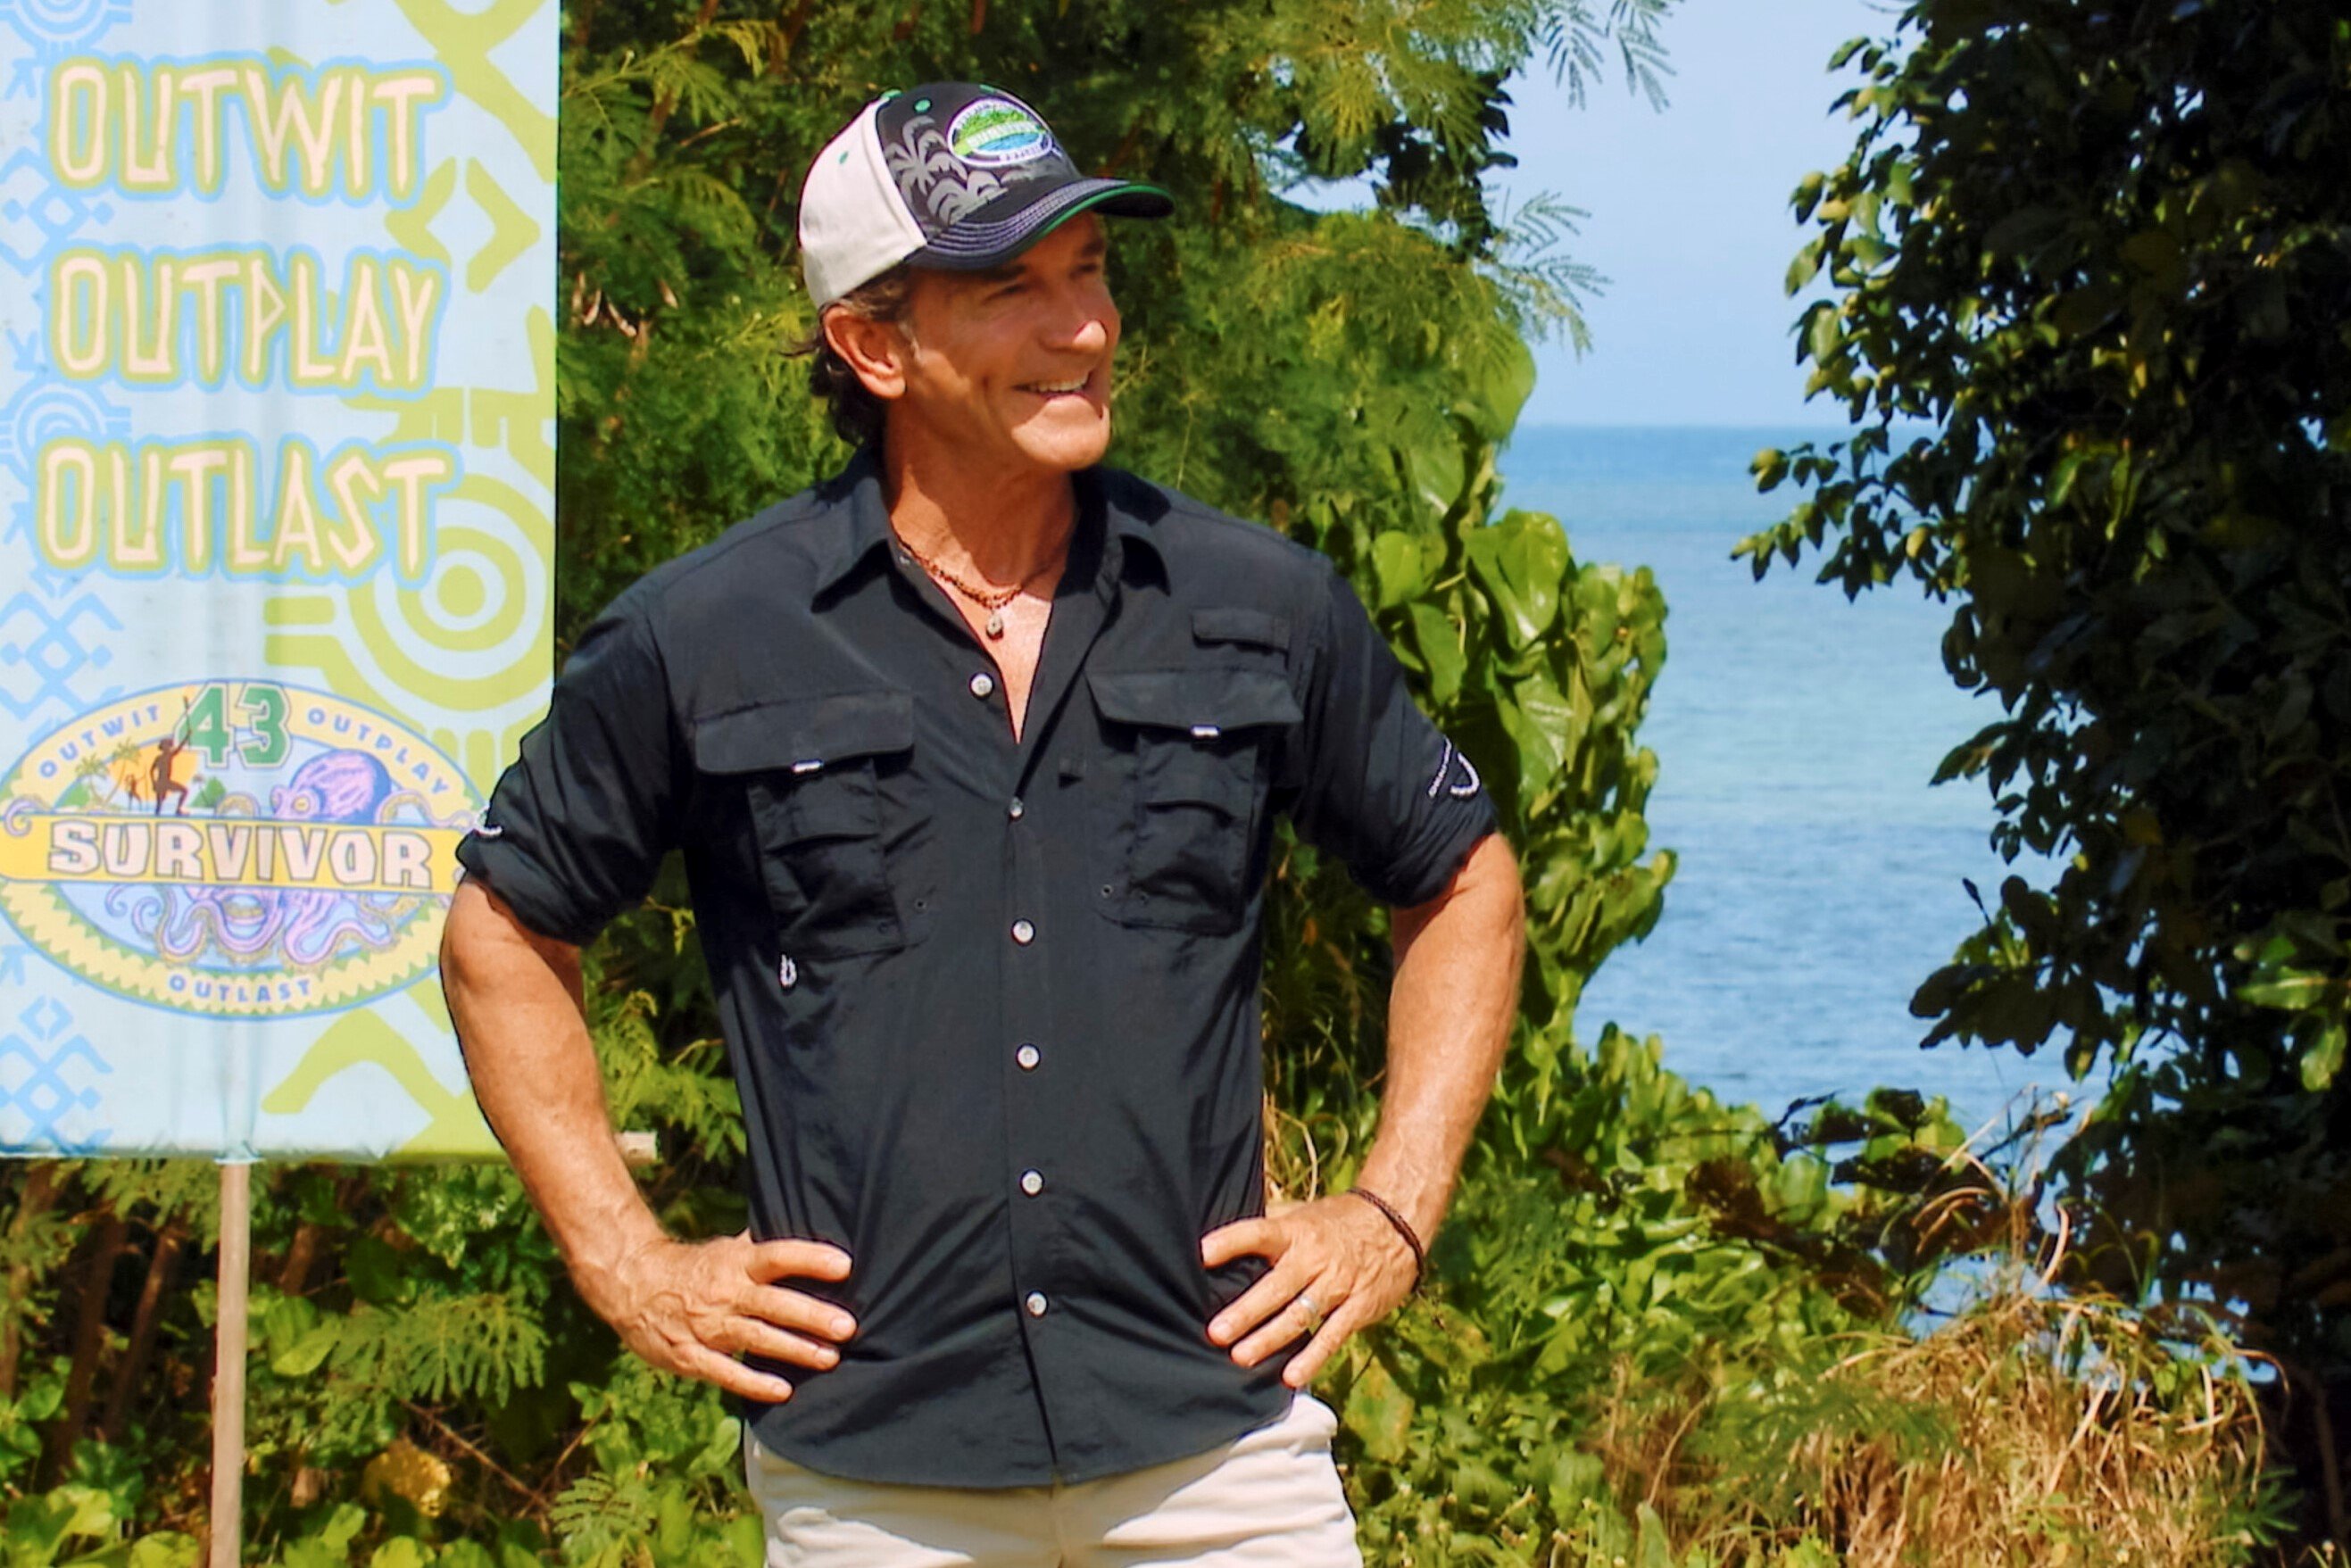 Jeff Probst, who hosts 'Survivor' on CBS, wears a black button-up shirt with rolled up sleeves, white pants, and a black and white 'Survivor' hat.